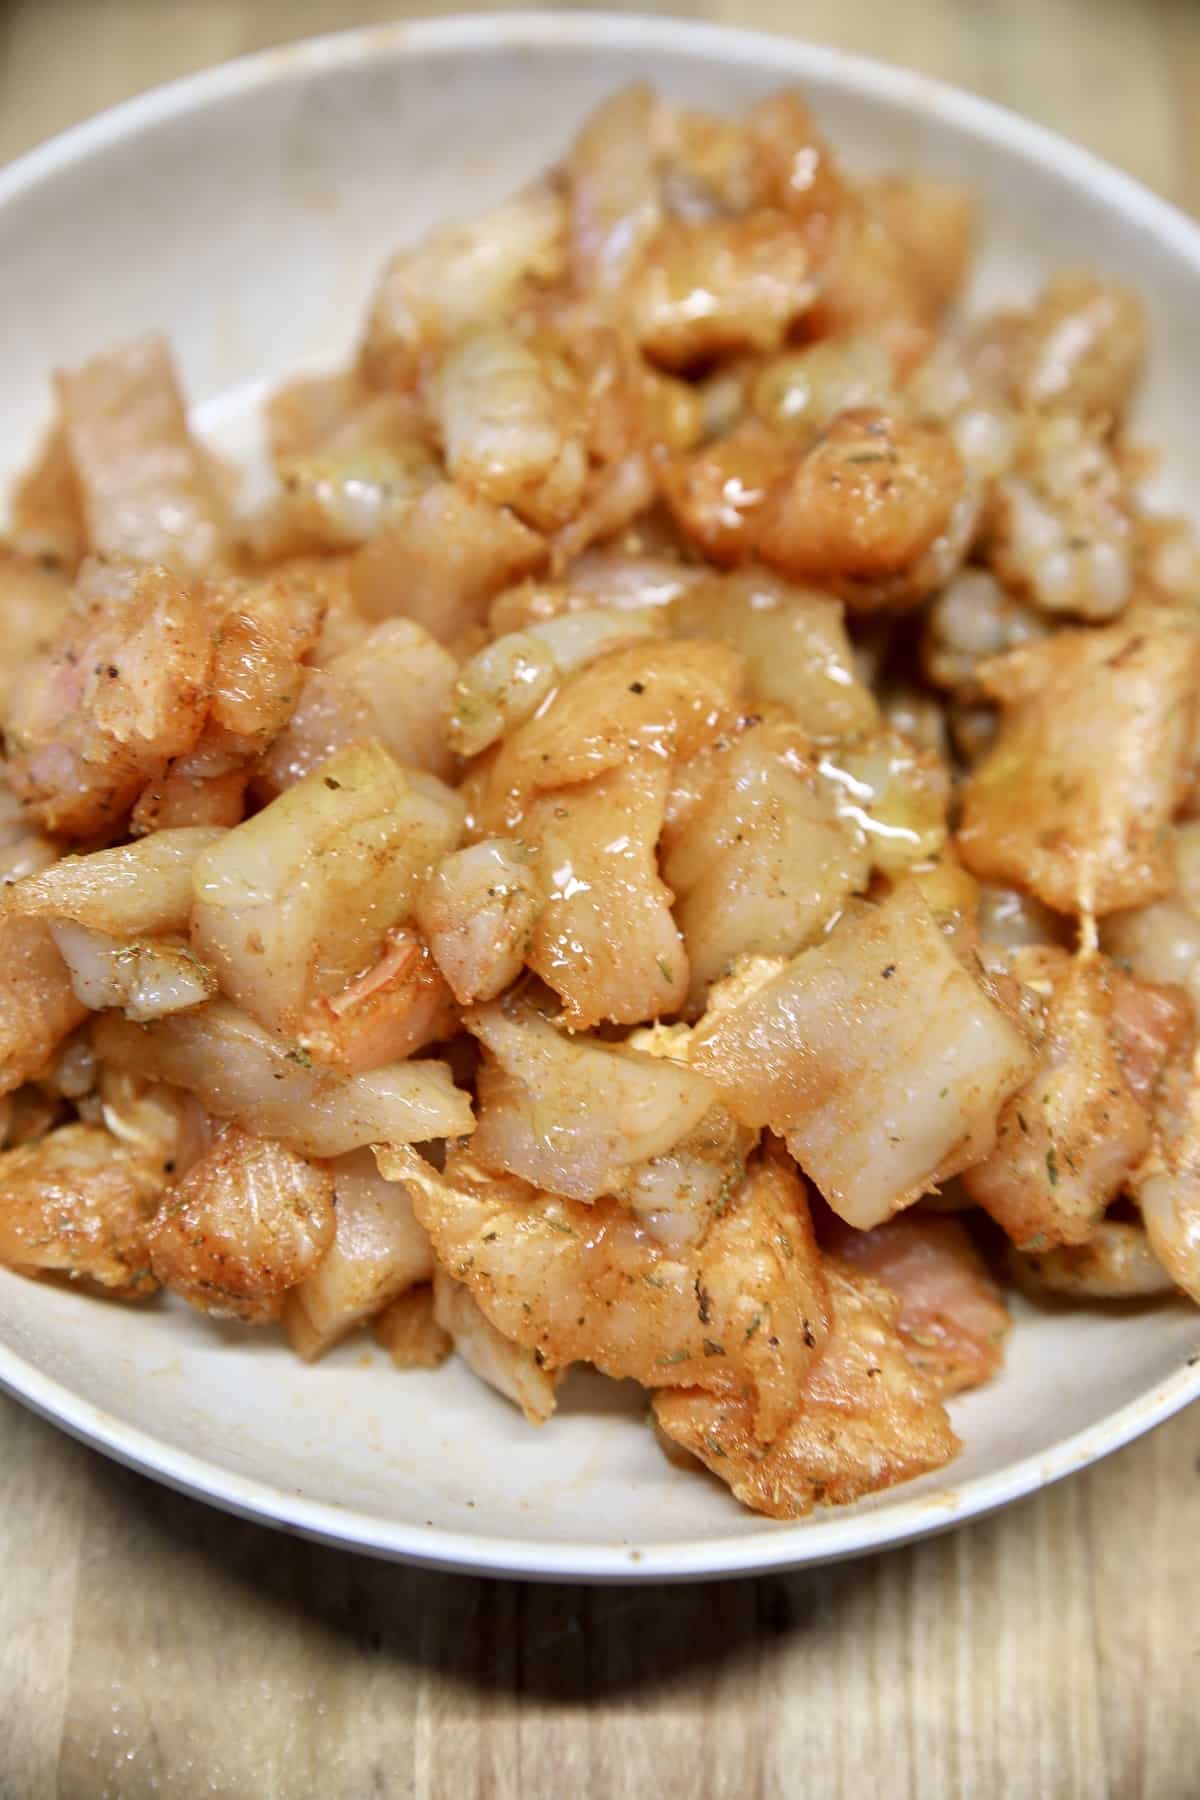 Seasoned shrimp and catfish pieces in a bowl for grilling.